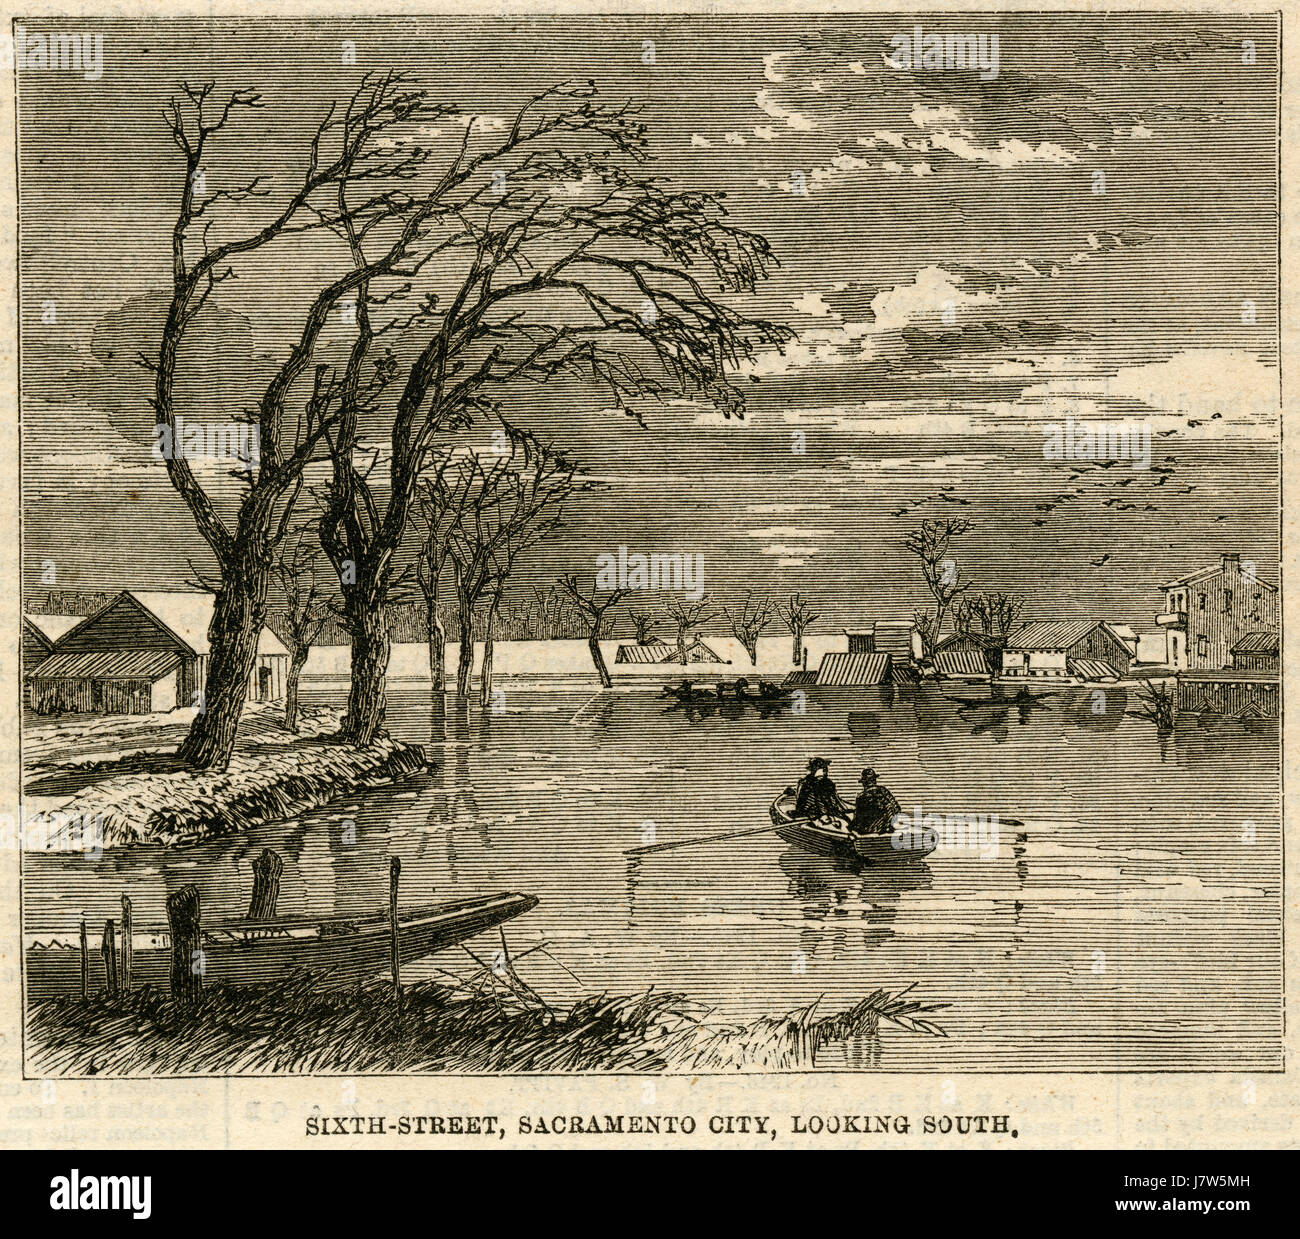 Antique c1862 engraving, Sixth Street flood, Sacramento City, Looking South. The Great Flood of 1862 was the largest flood in the recorded history of Oregon, Nevada, and California, occurring from December 1861 to January 1862. The city of Sacramento suffered the worst damage due to its levee, which lay in a wide and flat valley at the junction of the American and Sacramento rivers. When the floodwaters entered from the higher ground on the east, the levee acted as a dam to keep the water in the city rather than let it flow out. SOURCE: ORIGINAL ENGRAVING. Stock Photo